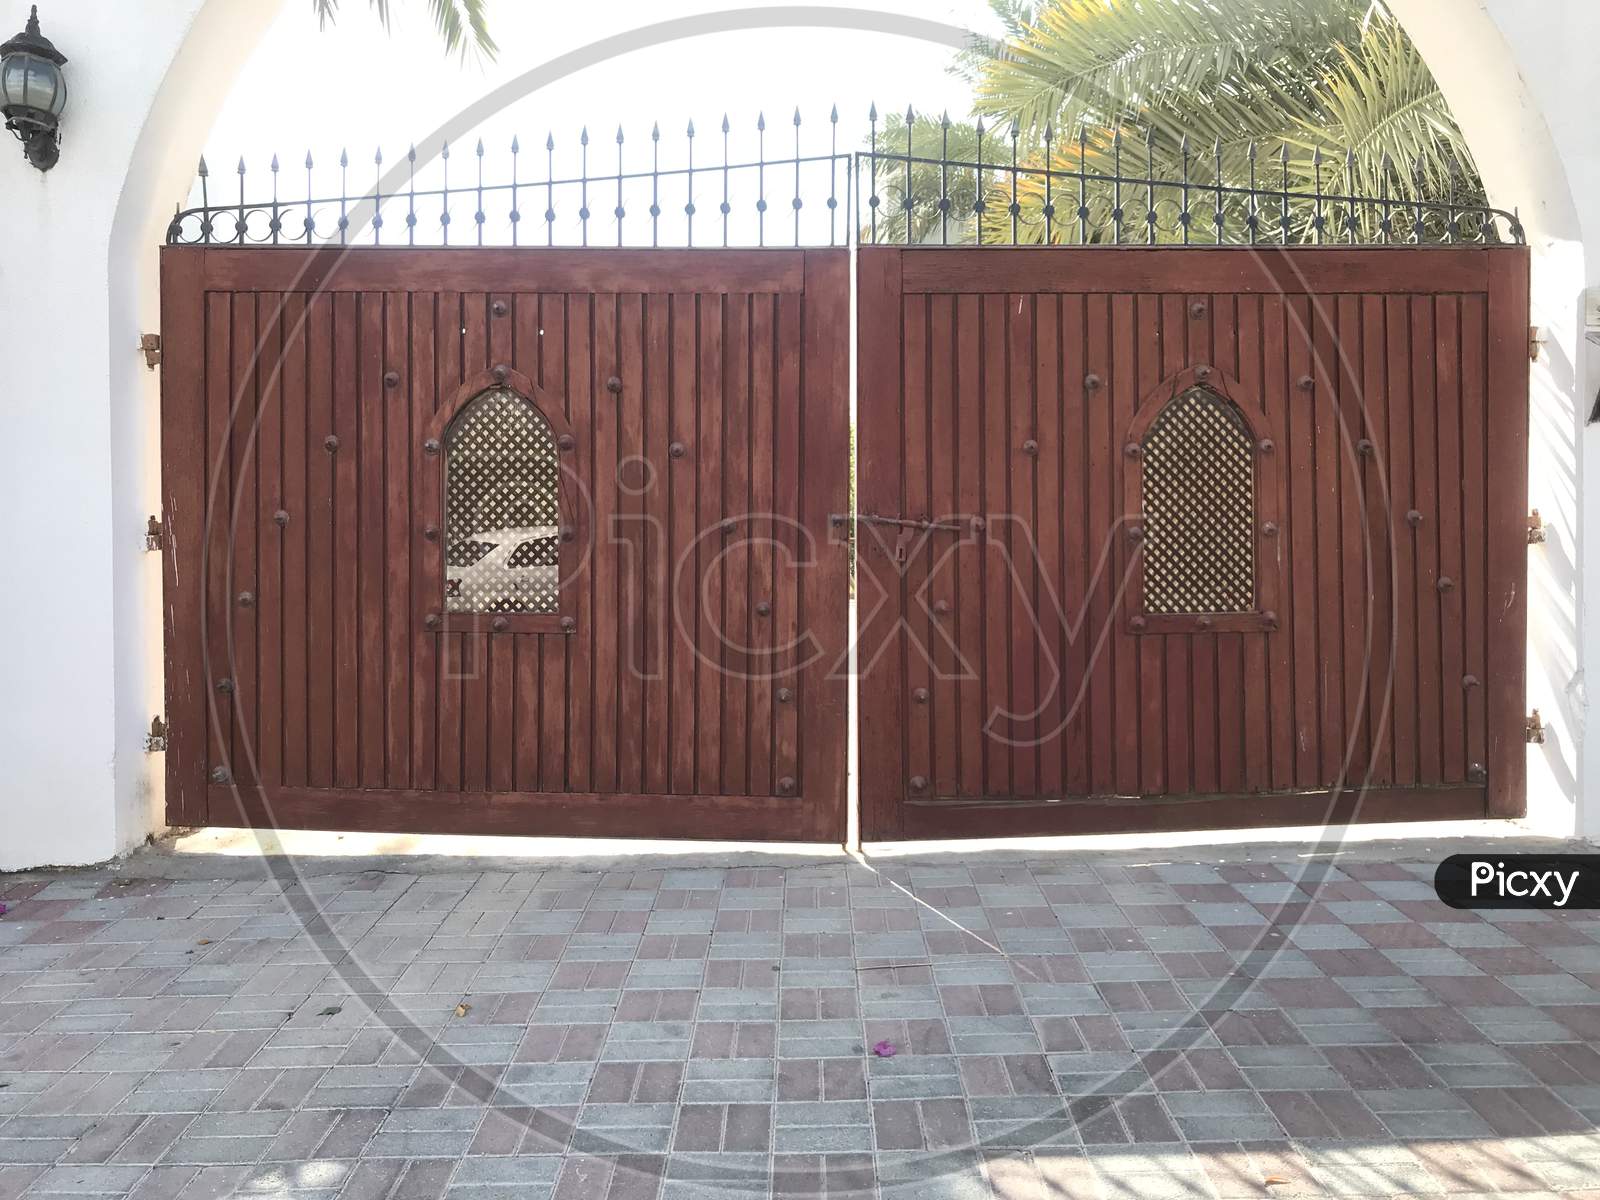 Wooden Shutter With Steel Framed Gate For An Big Villa And Two Openings For Identification Of Personnel